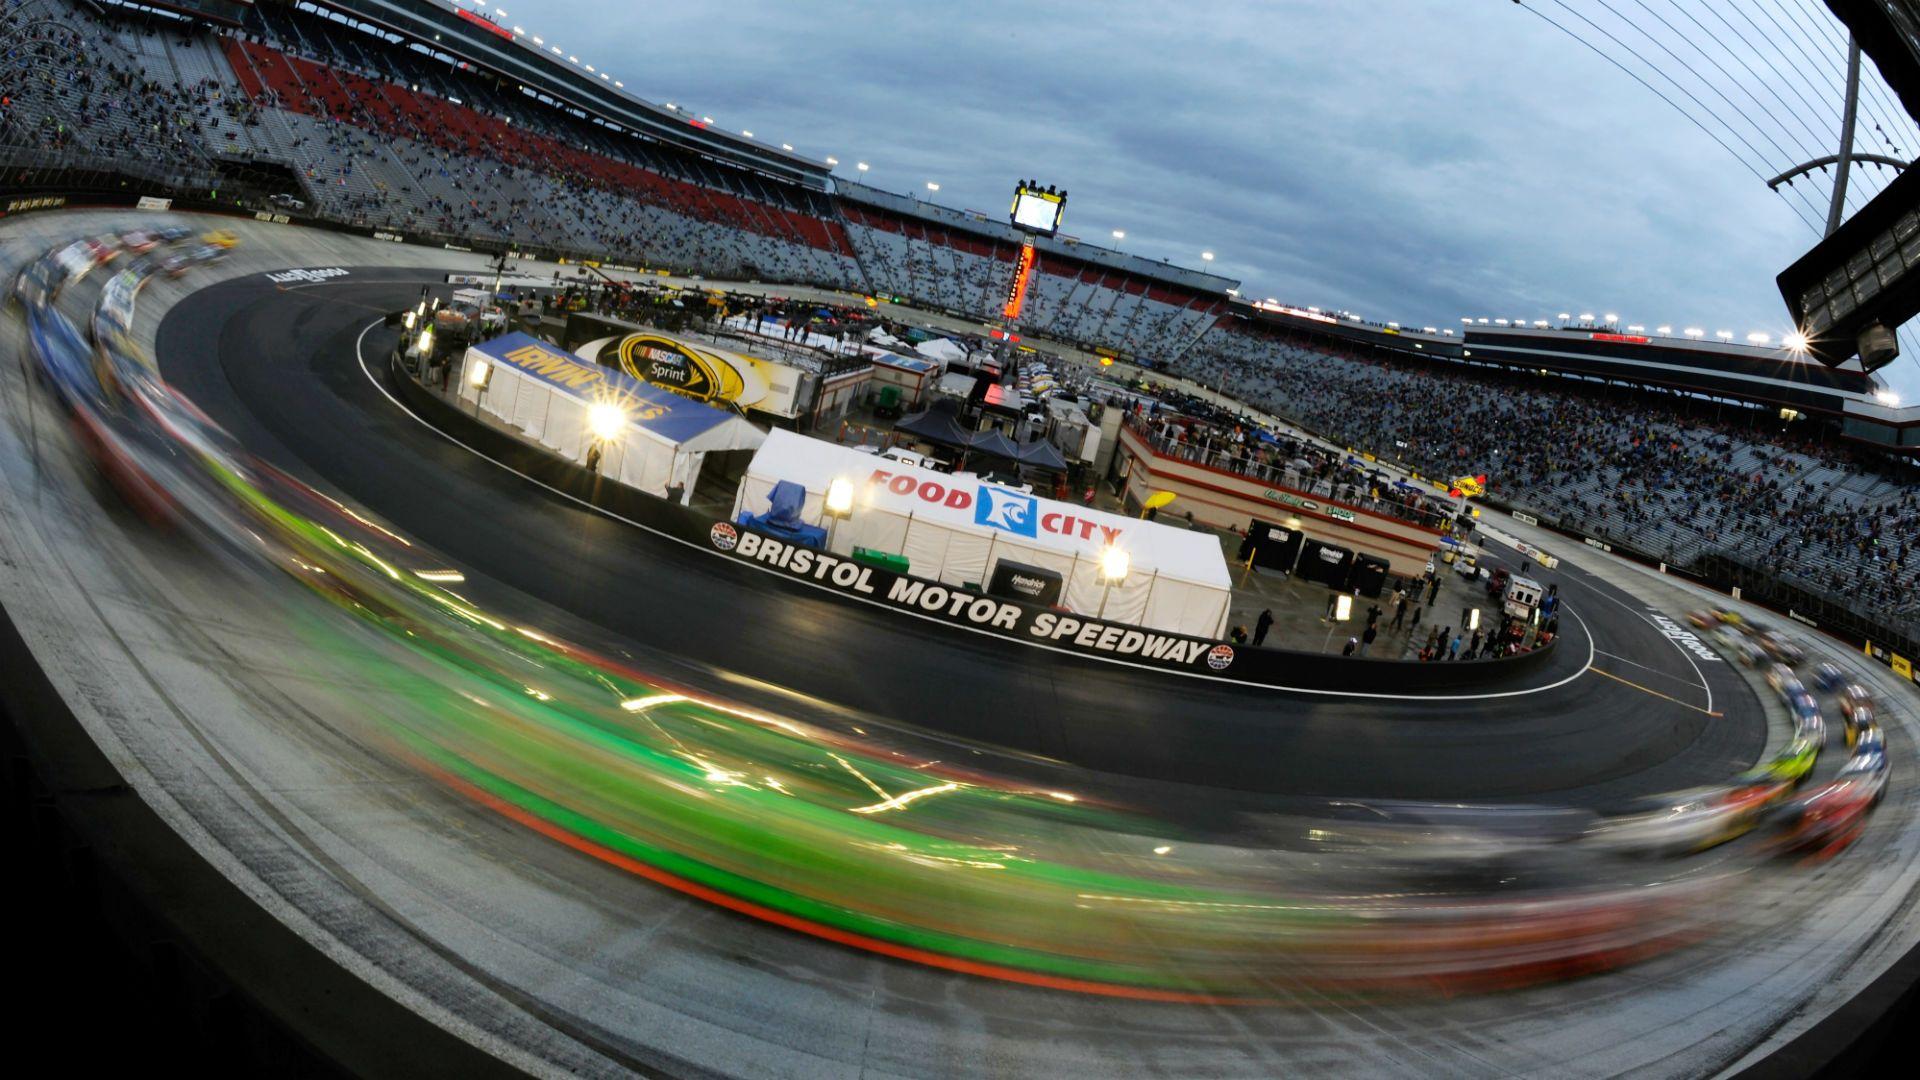 Food City 500 weather report: Drivers can expect rain Sunday